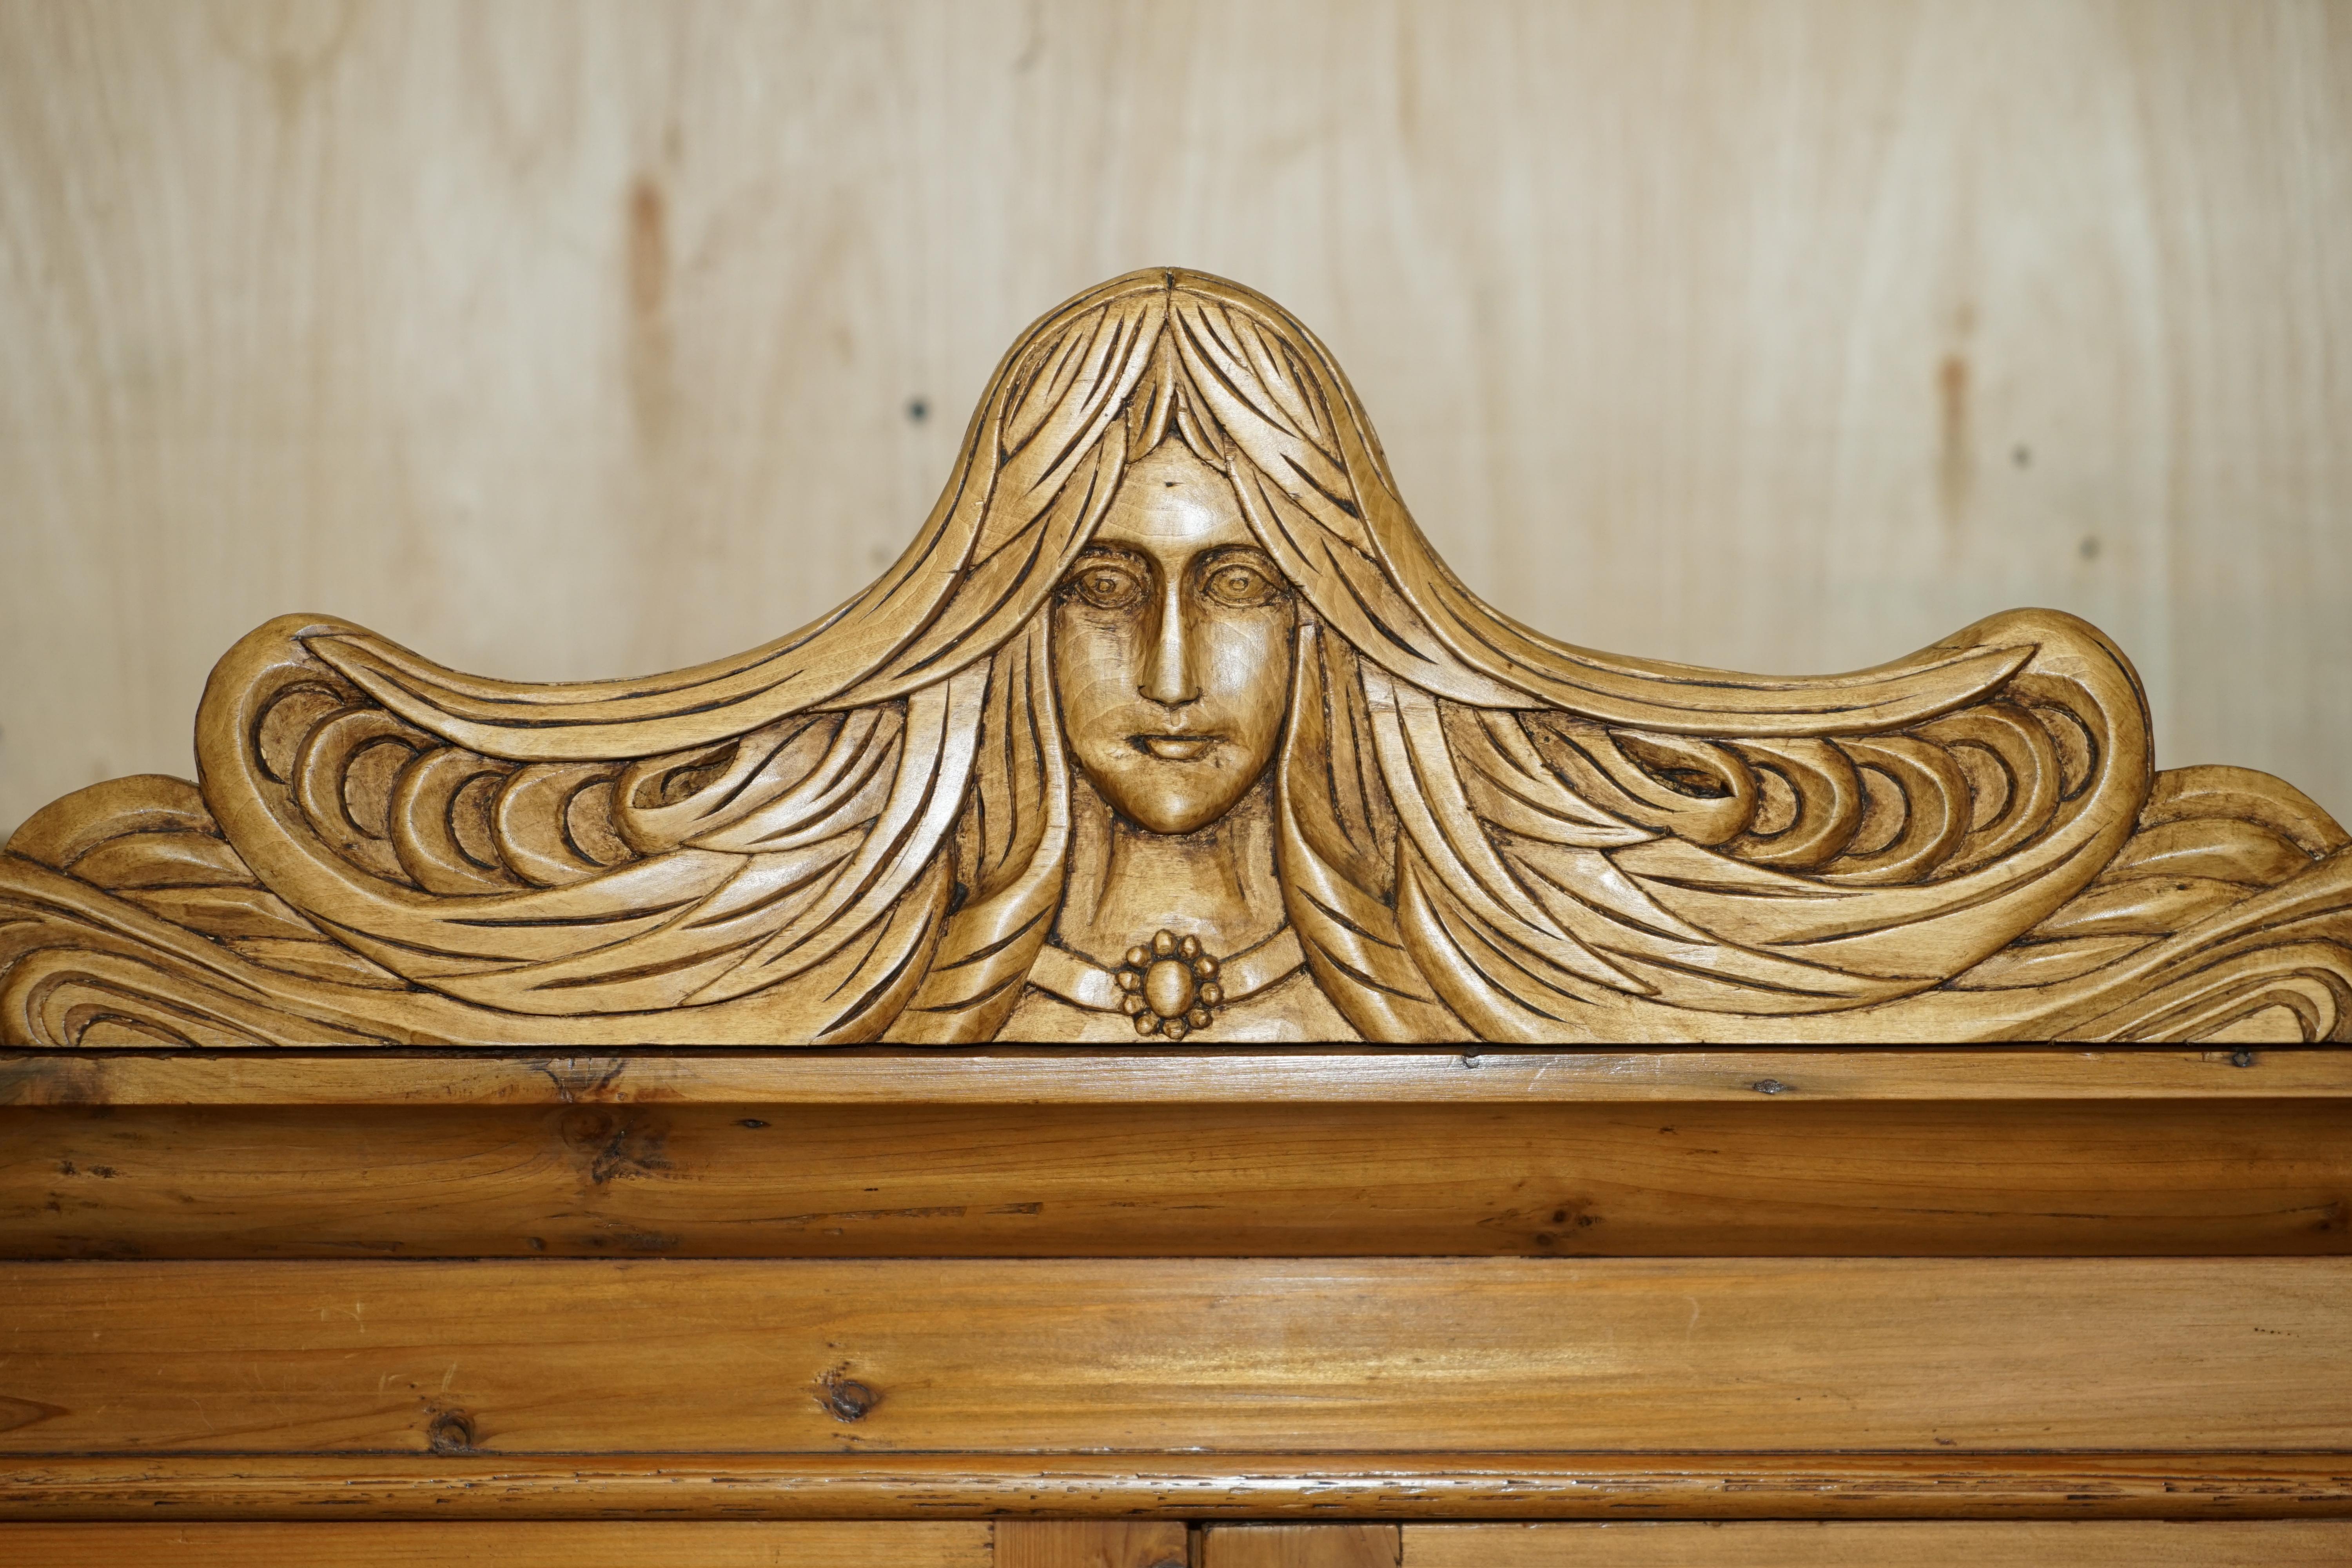 English EXQUISITE ViNTAGE HAND CARVED ART NOUVEAU PINE WARDROBE NUDE NYMPHS INSIDE For Sale